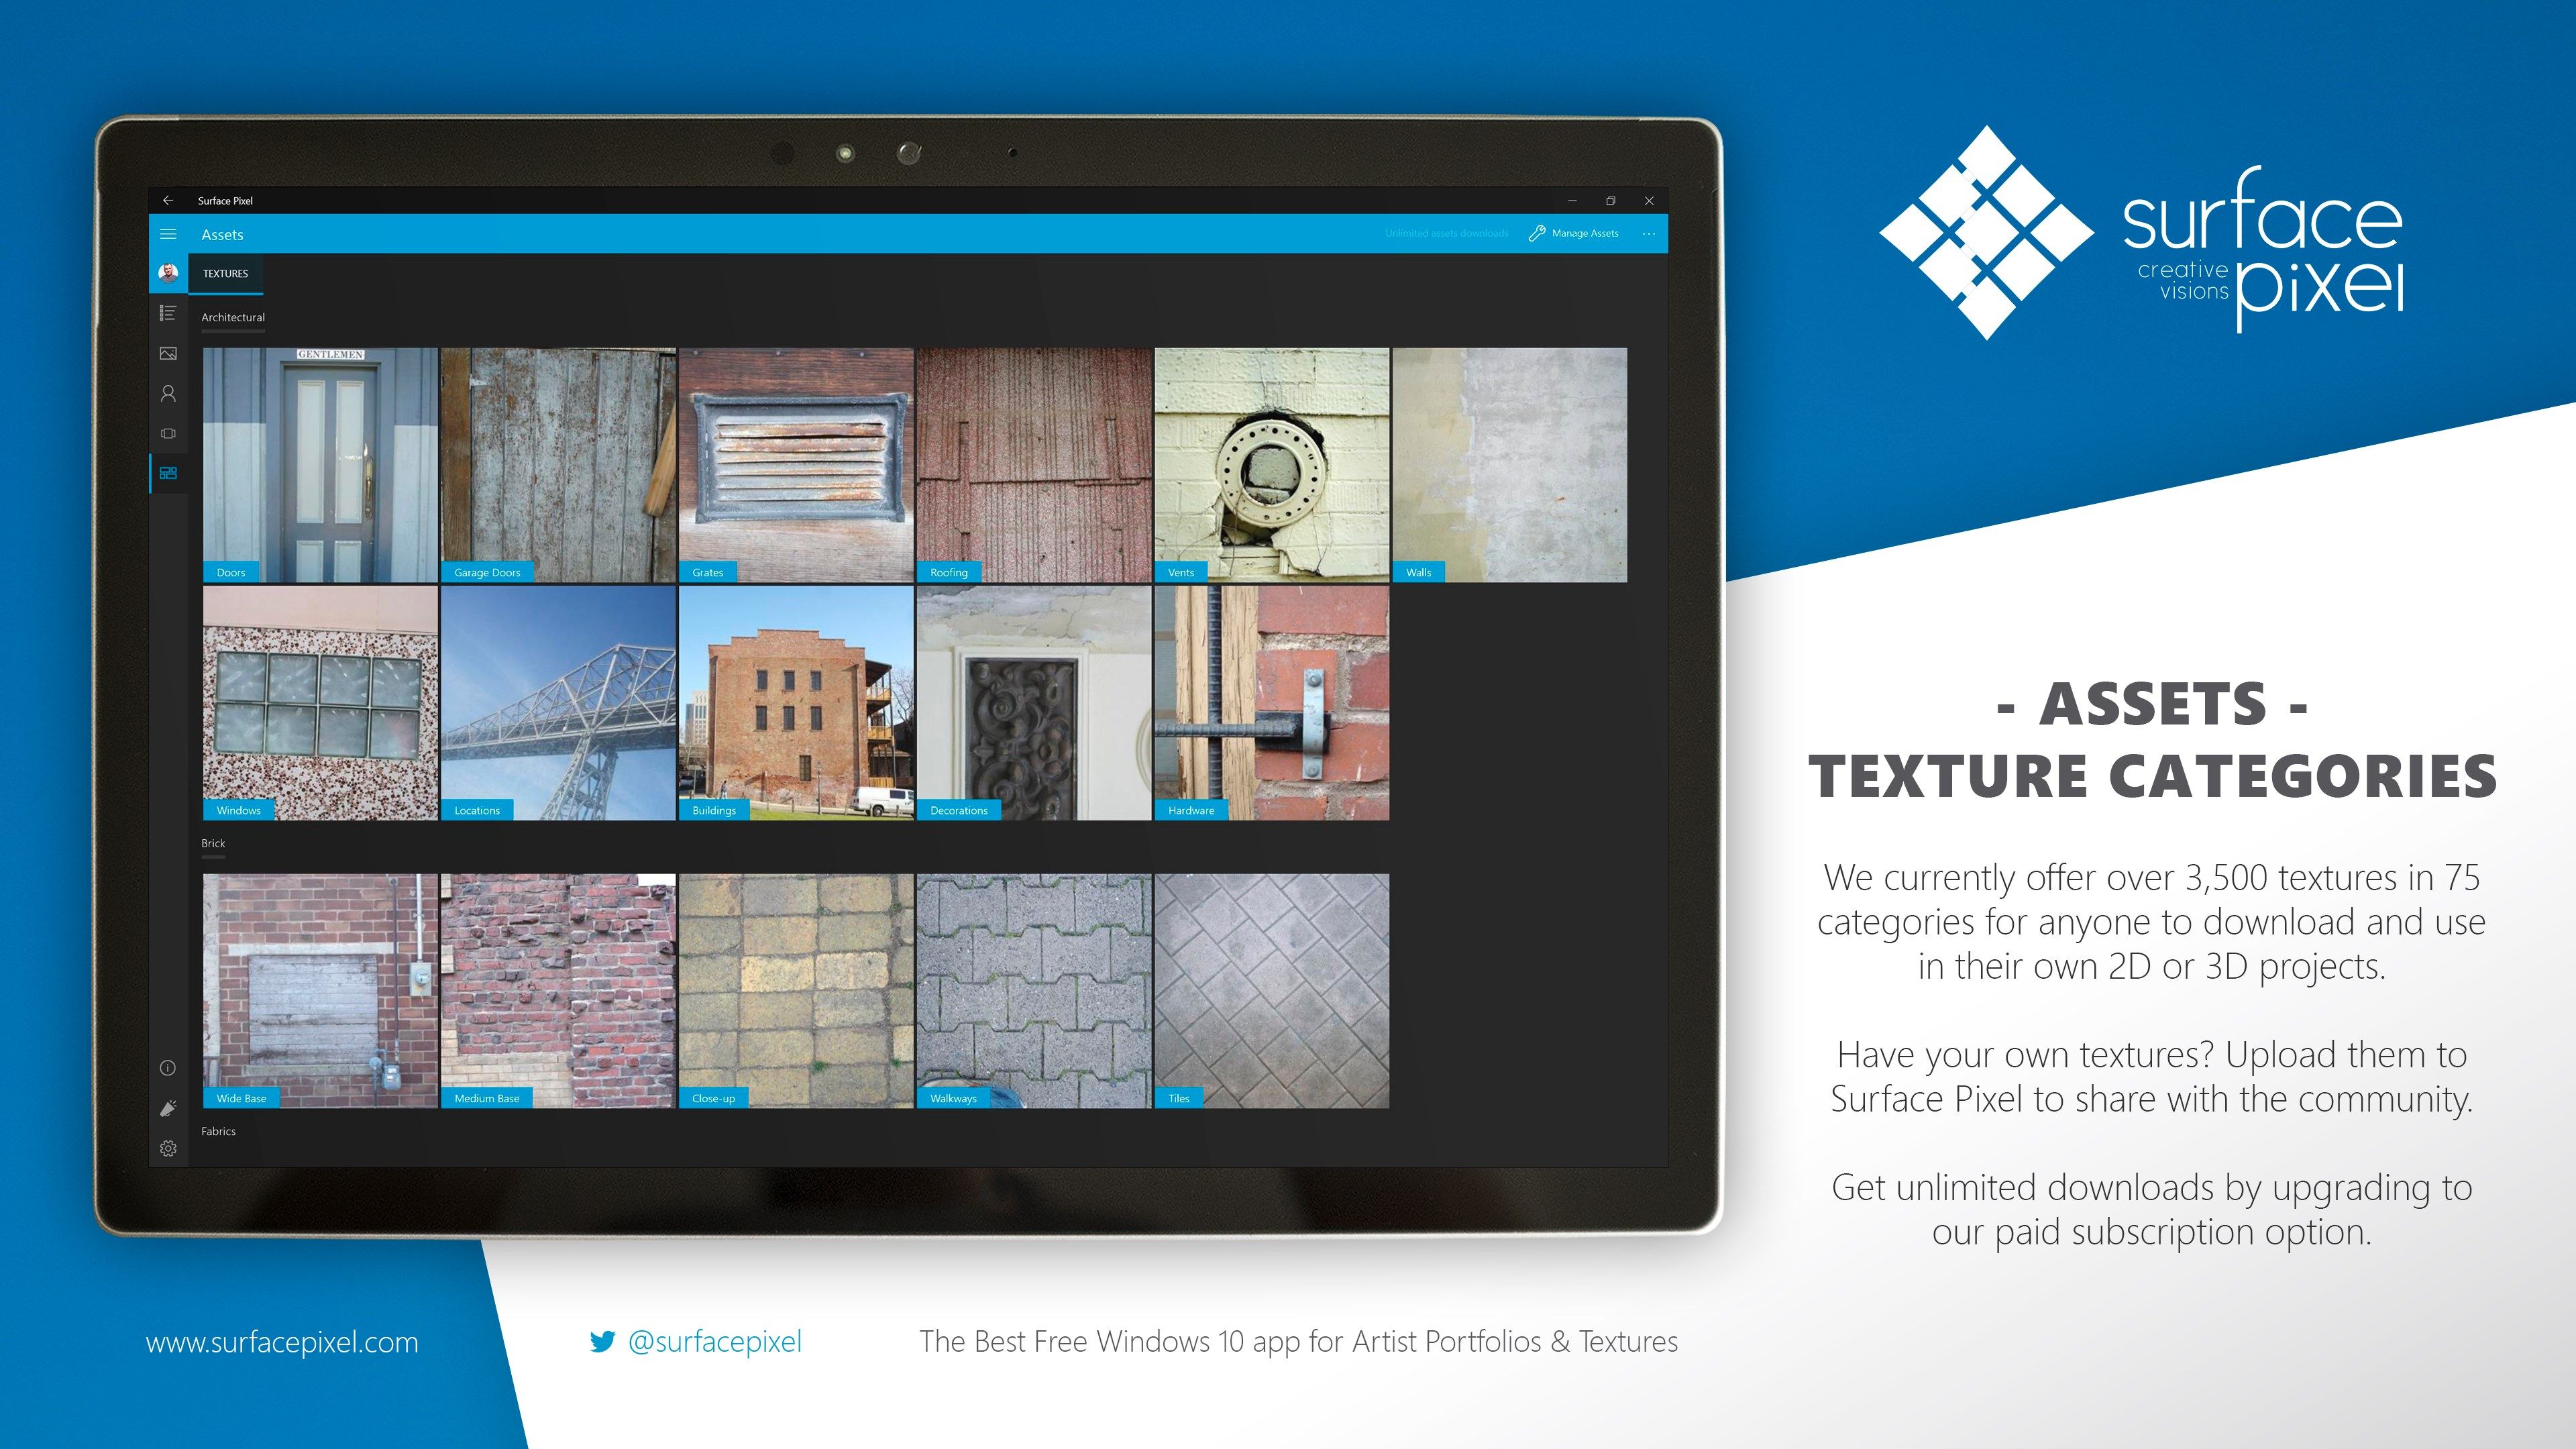 We currently offer over 3,500 textures in 75 categories for anyone to download and use in their own 2D or 3D projects.

Have your own textures? Upload them to Surface Pixel to share with the community.

Get unlimited downloads by upgrading to our paid subscription option.